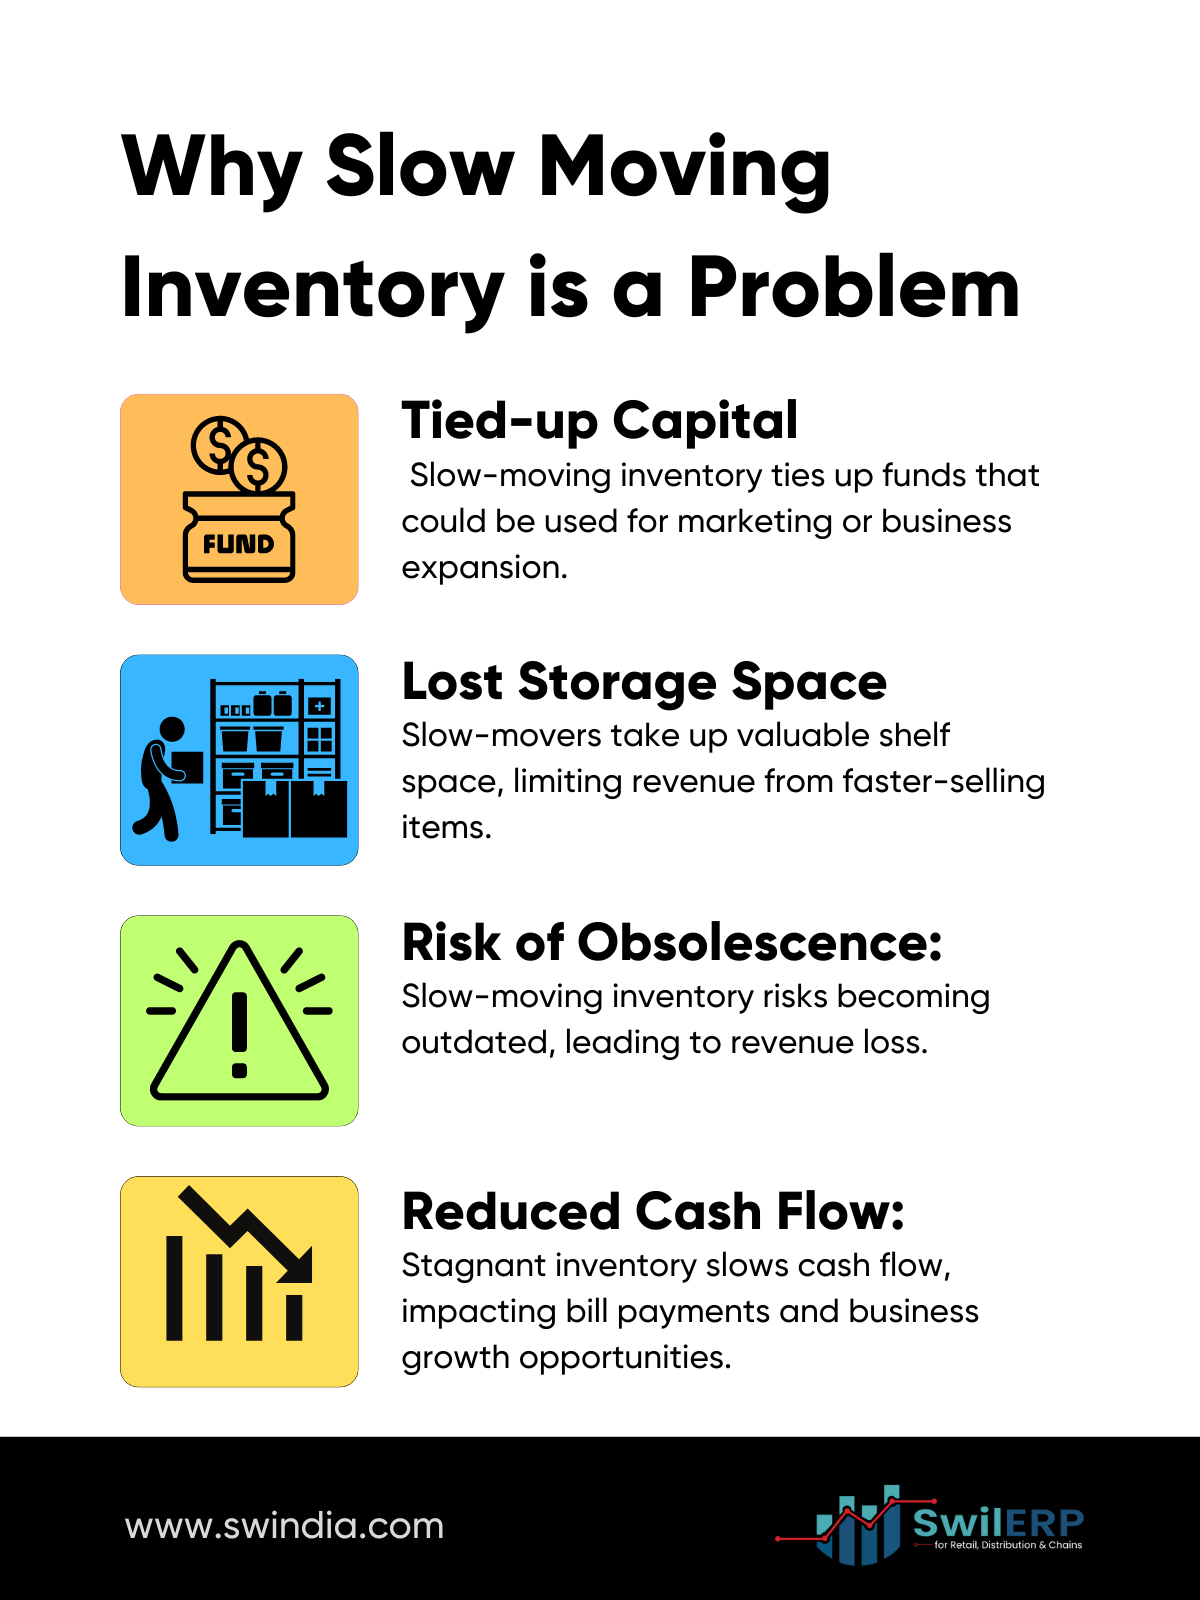 Infographic from swil blog explains why slow-moving inventory is a problem for businesses, including tied-up capital, lost storage space, risk of obsolescence, and reduced cash flow